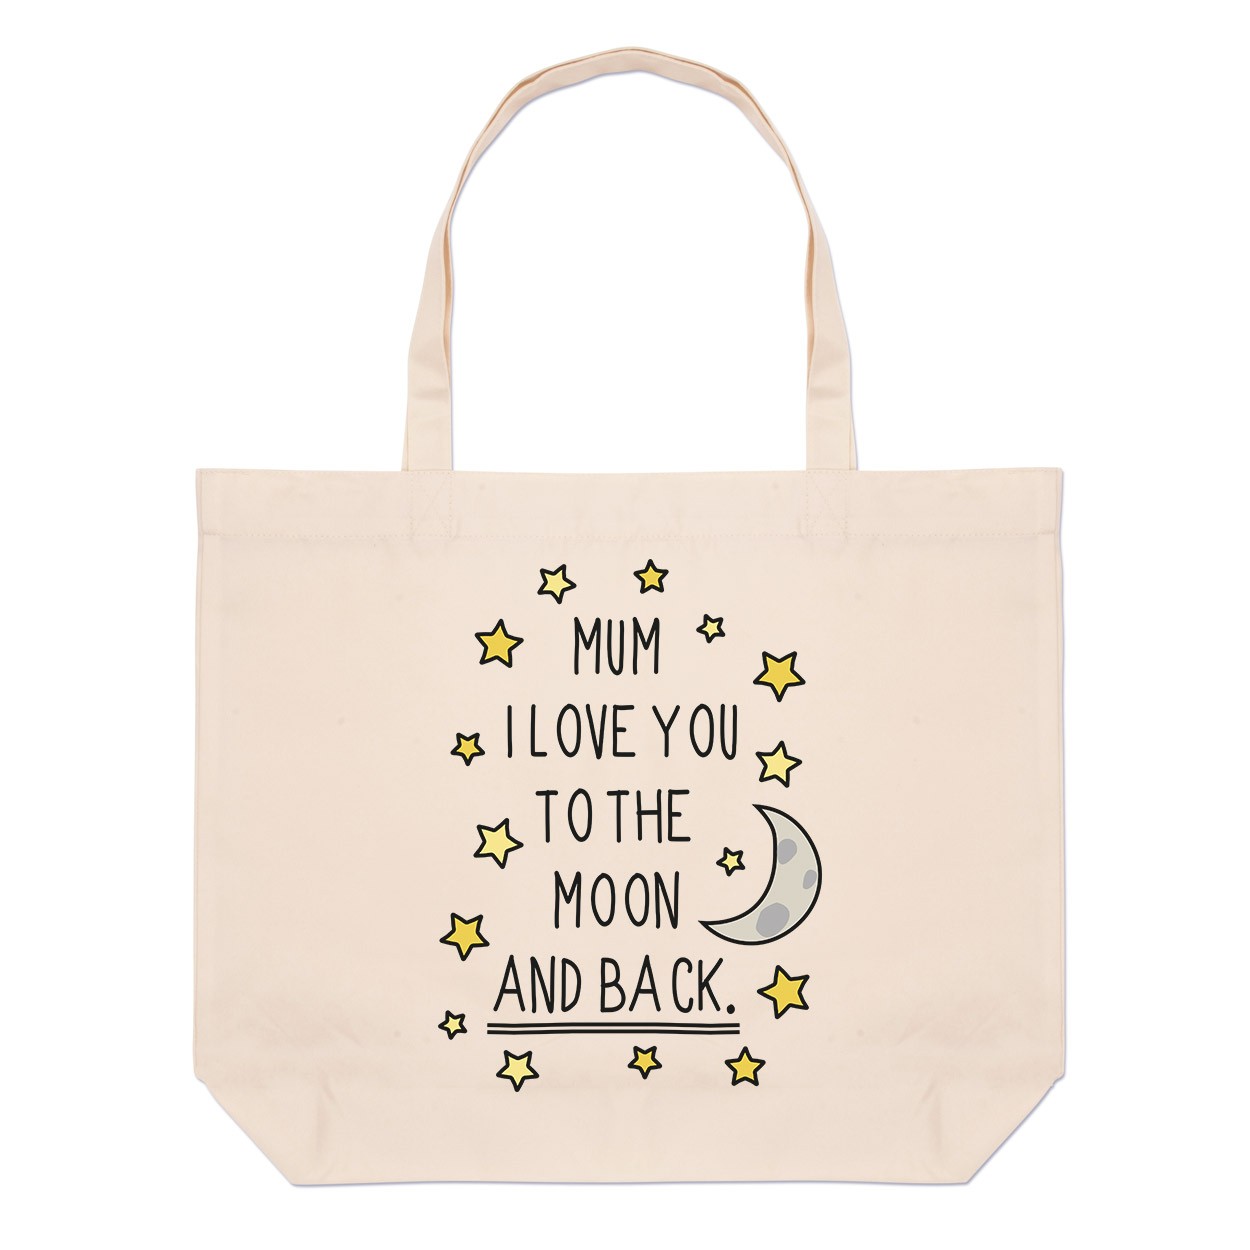 Mum I Love You To The Moon And Back Large Beach Tote Bag